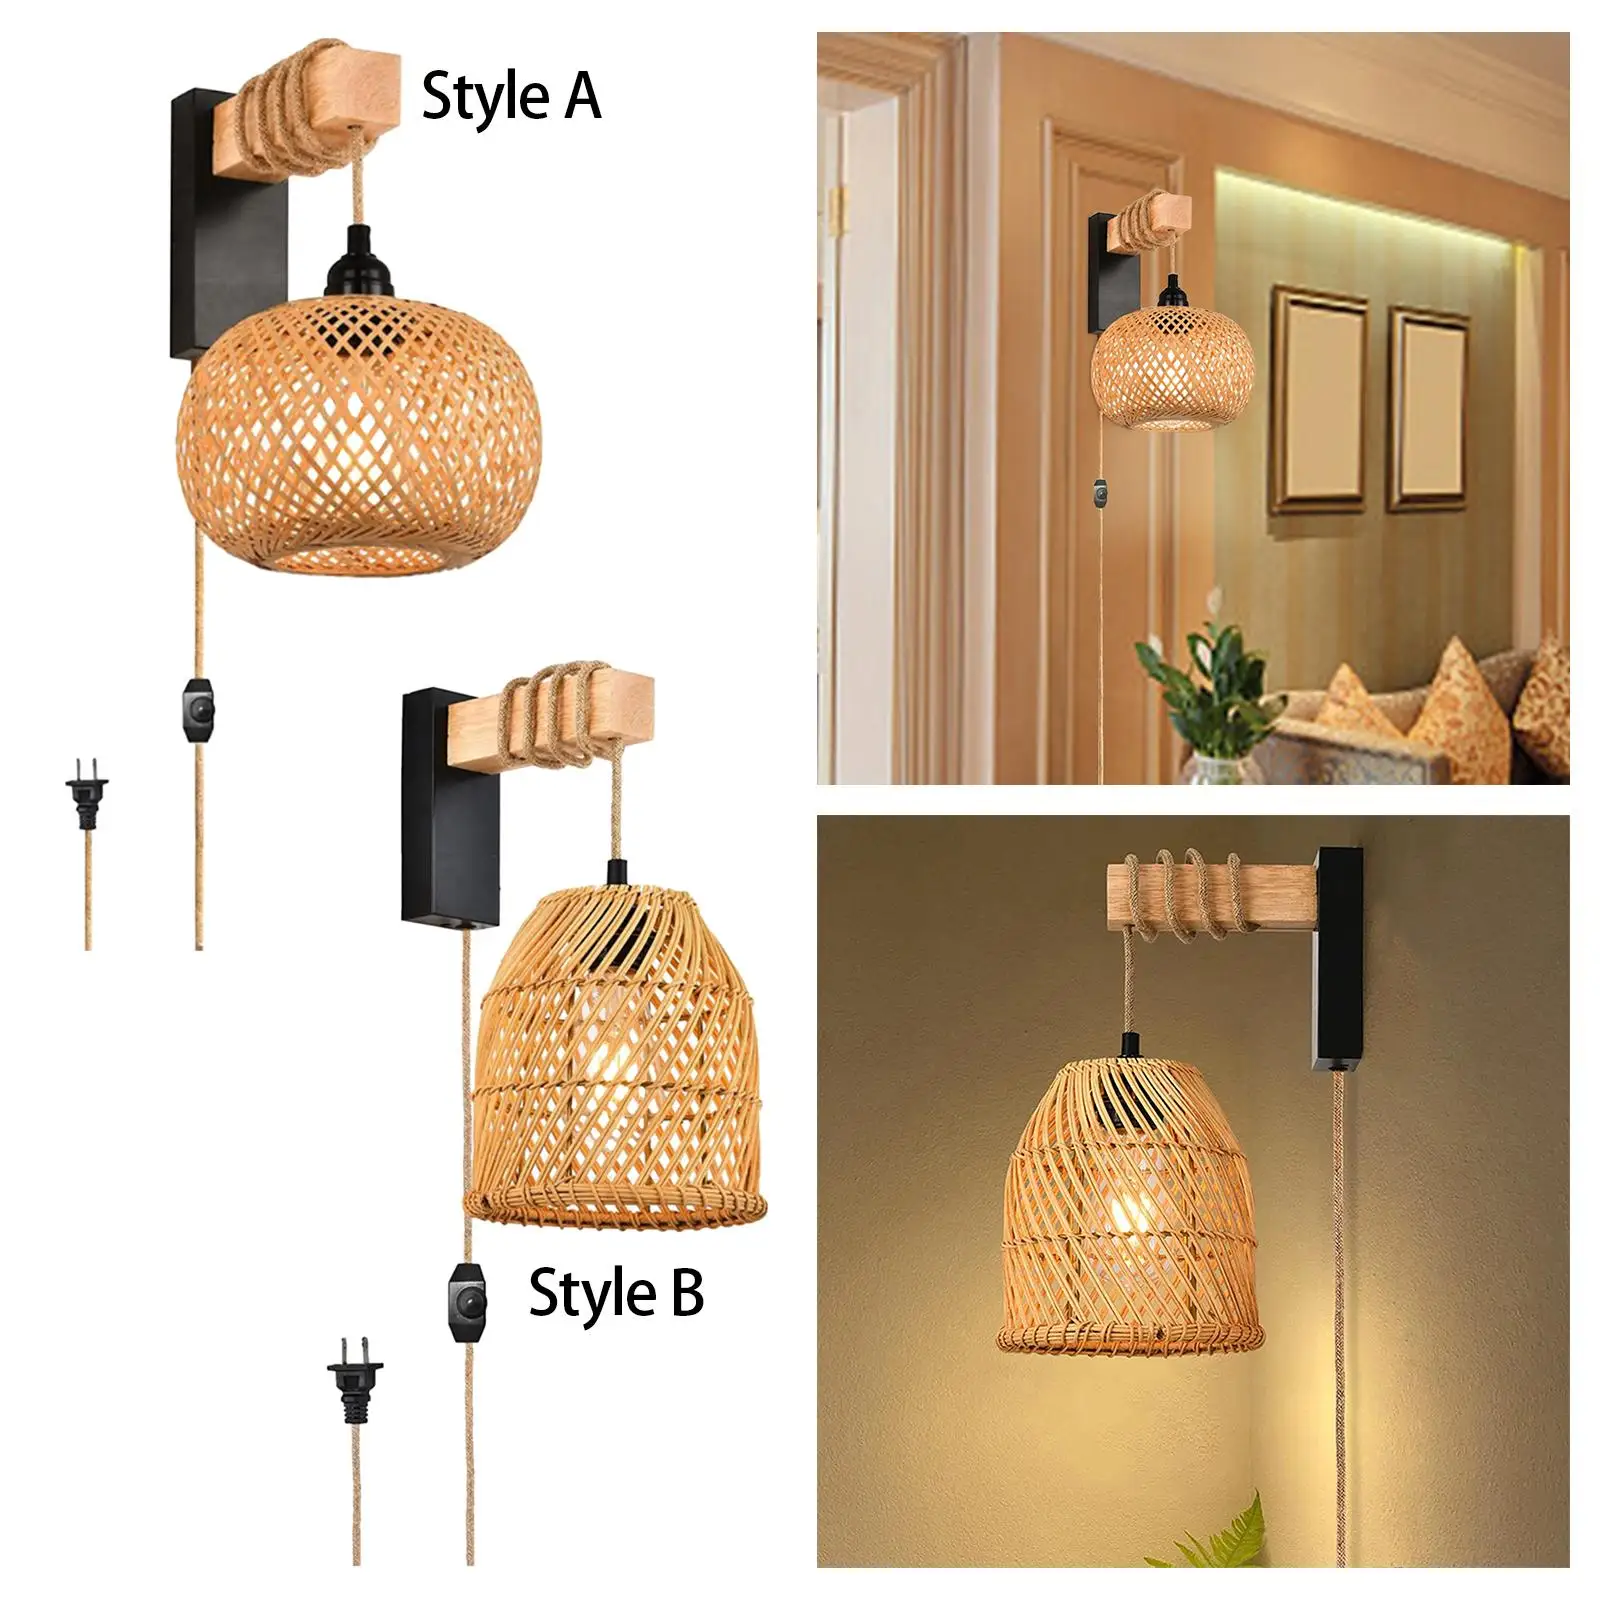 Wall Lamp with Wood Arm Bamboo Rustic Lantern Wall Light Plug in Wall Sconce for Bedroom Living Room Hotel Cafe Farmhouse